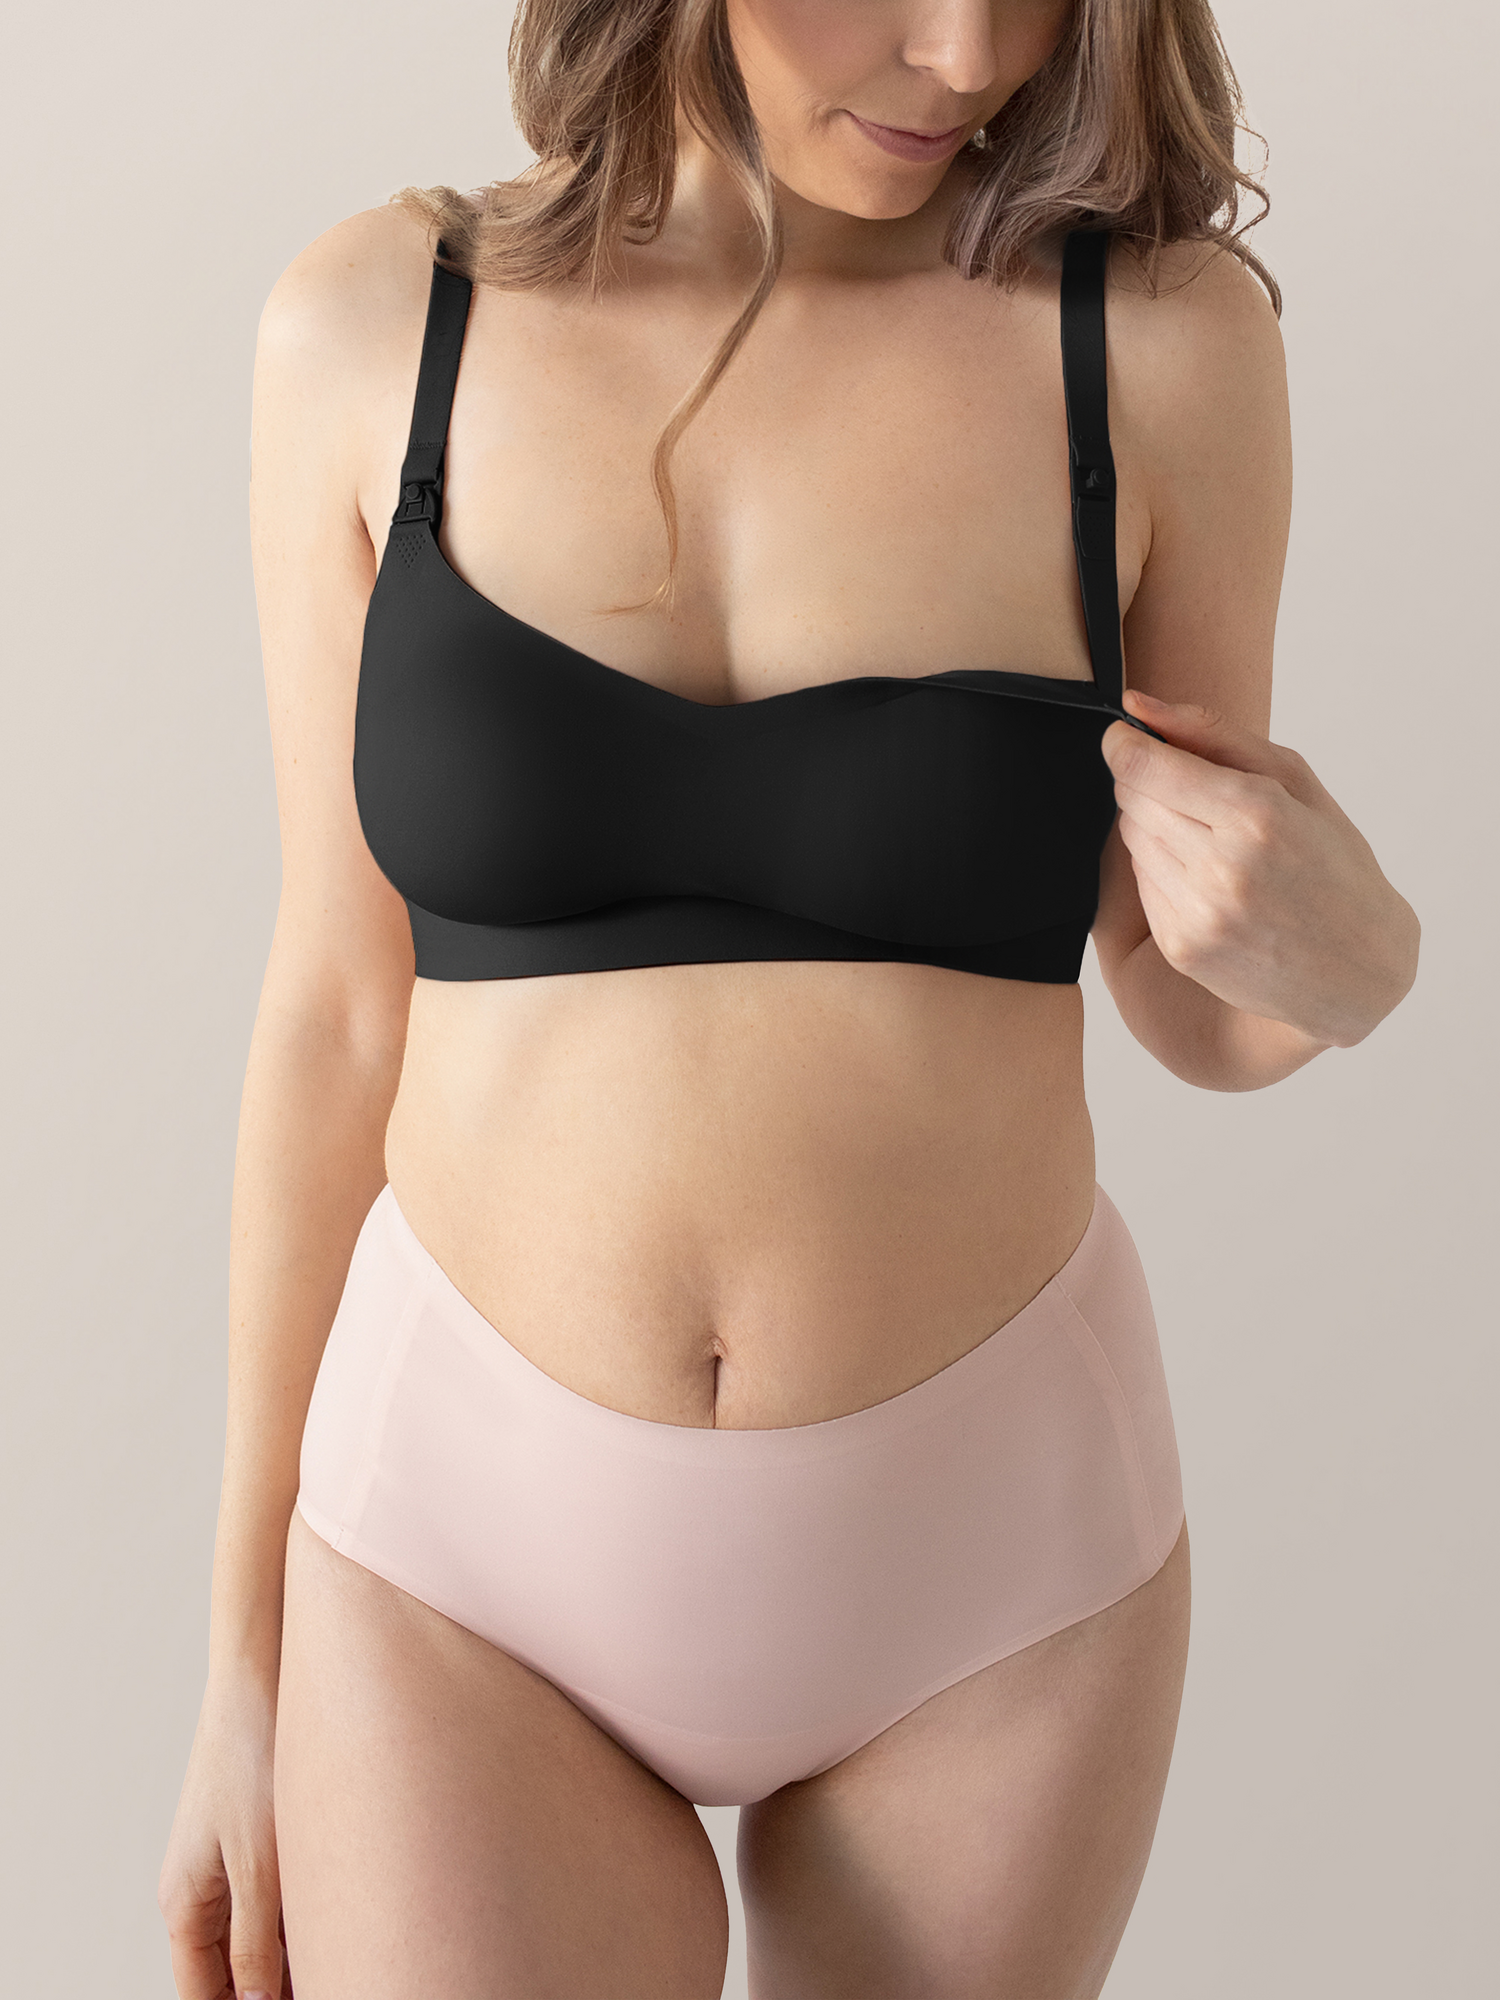 Model wearing the Ultra Comfort Smooth Classic Nursing Bra | Black showing the clip down nursing access.